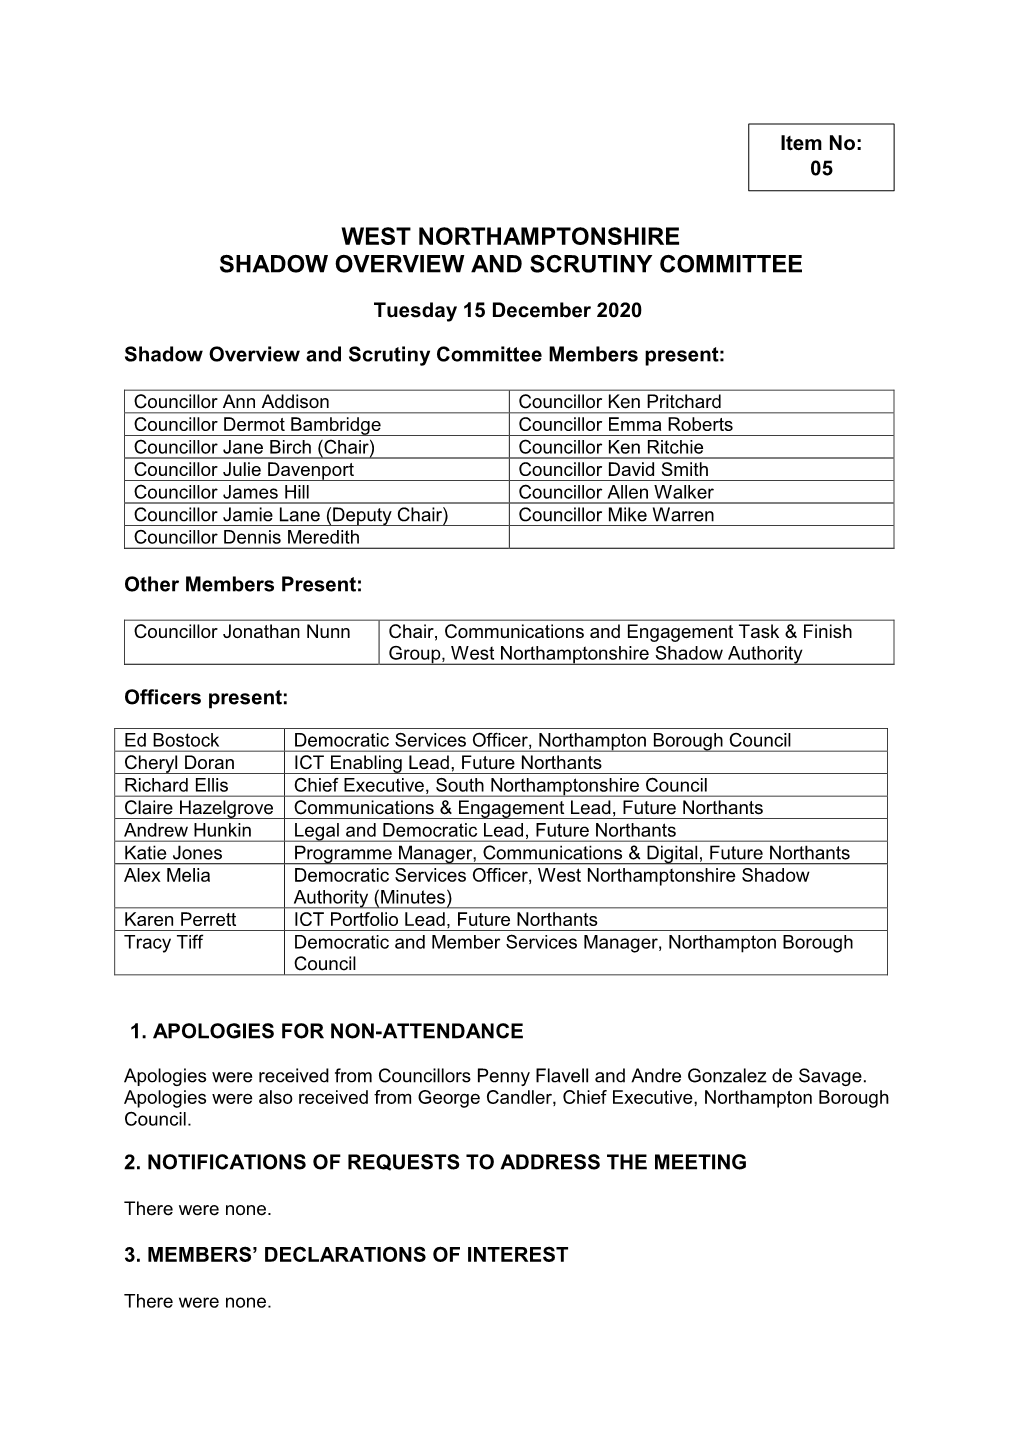 West Northamptonshire Shadow Overview and Scrutiny Committee